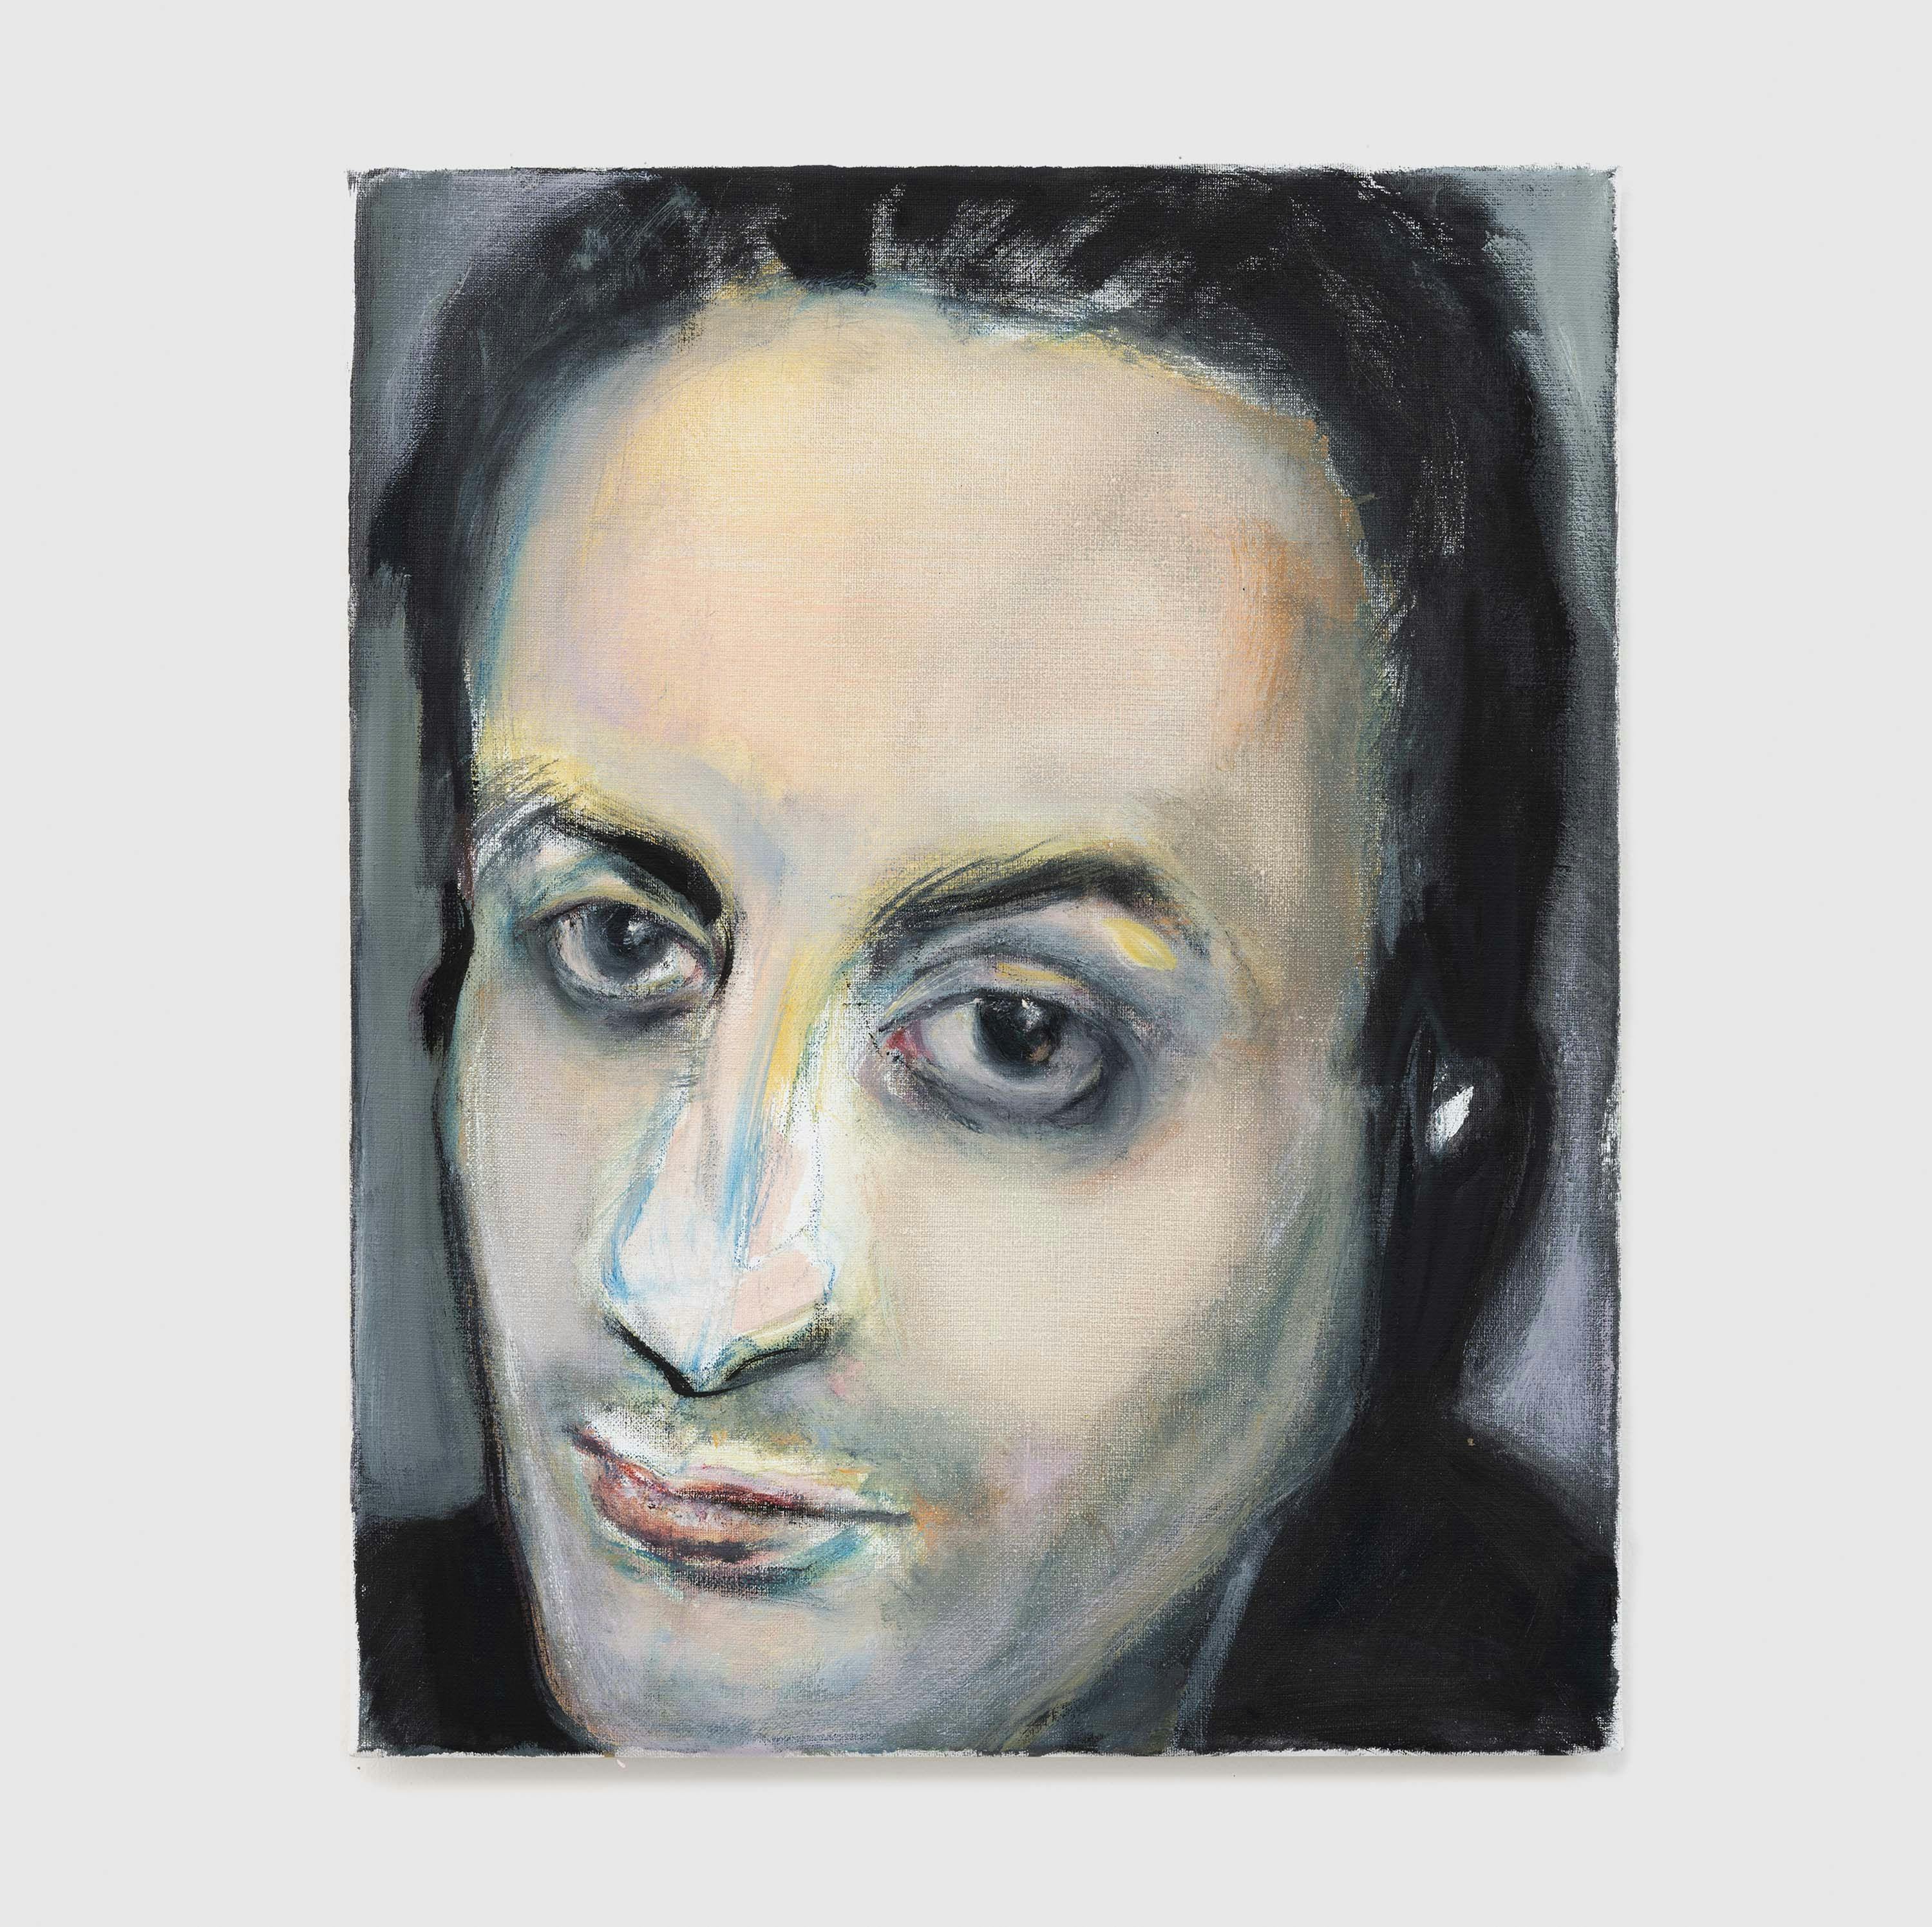 An oil on canvas painting by Marlene Dumas, titled Hafid Bouazza, dated 2020.